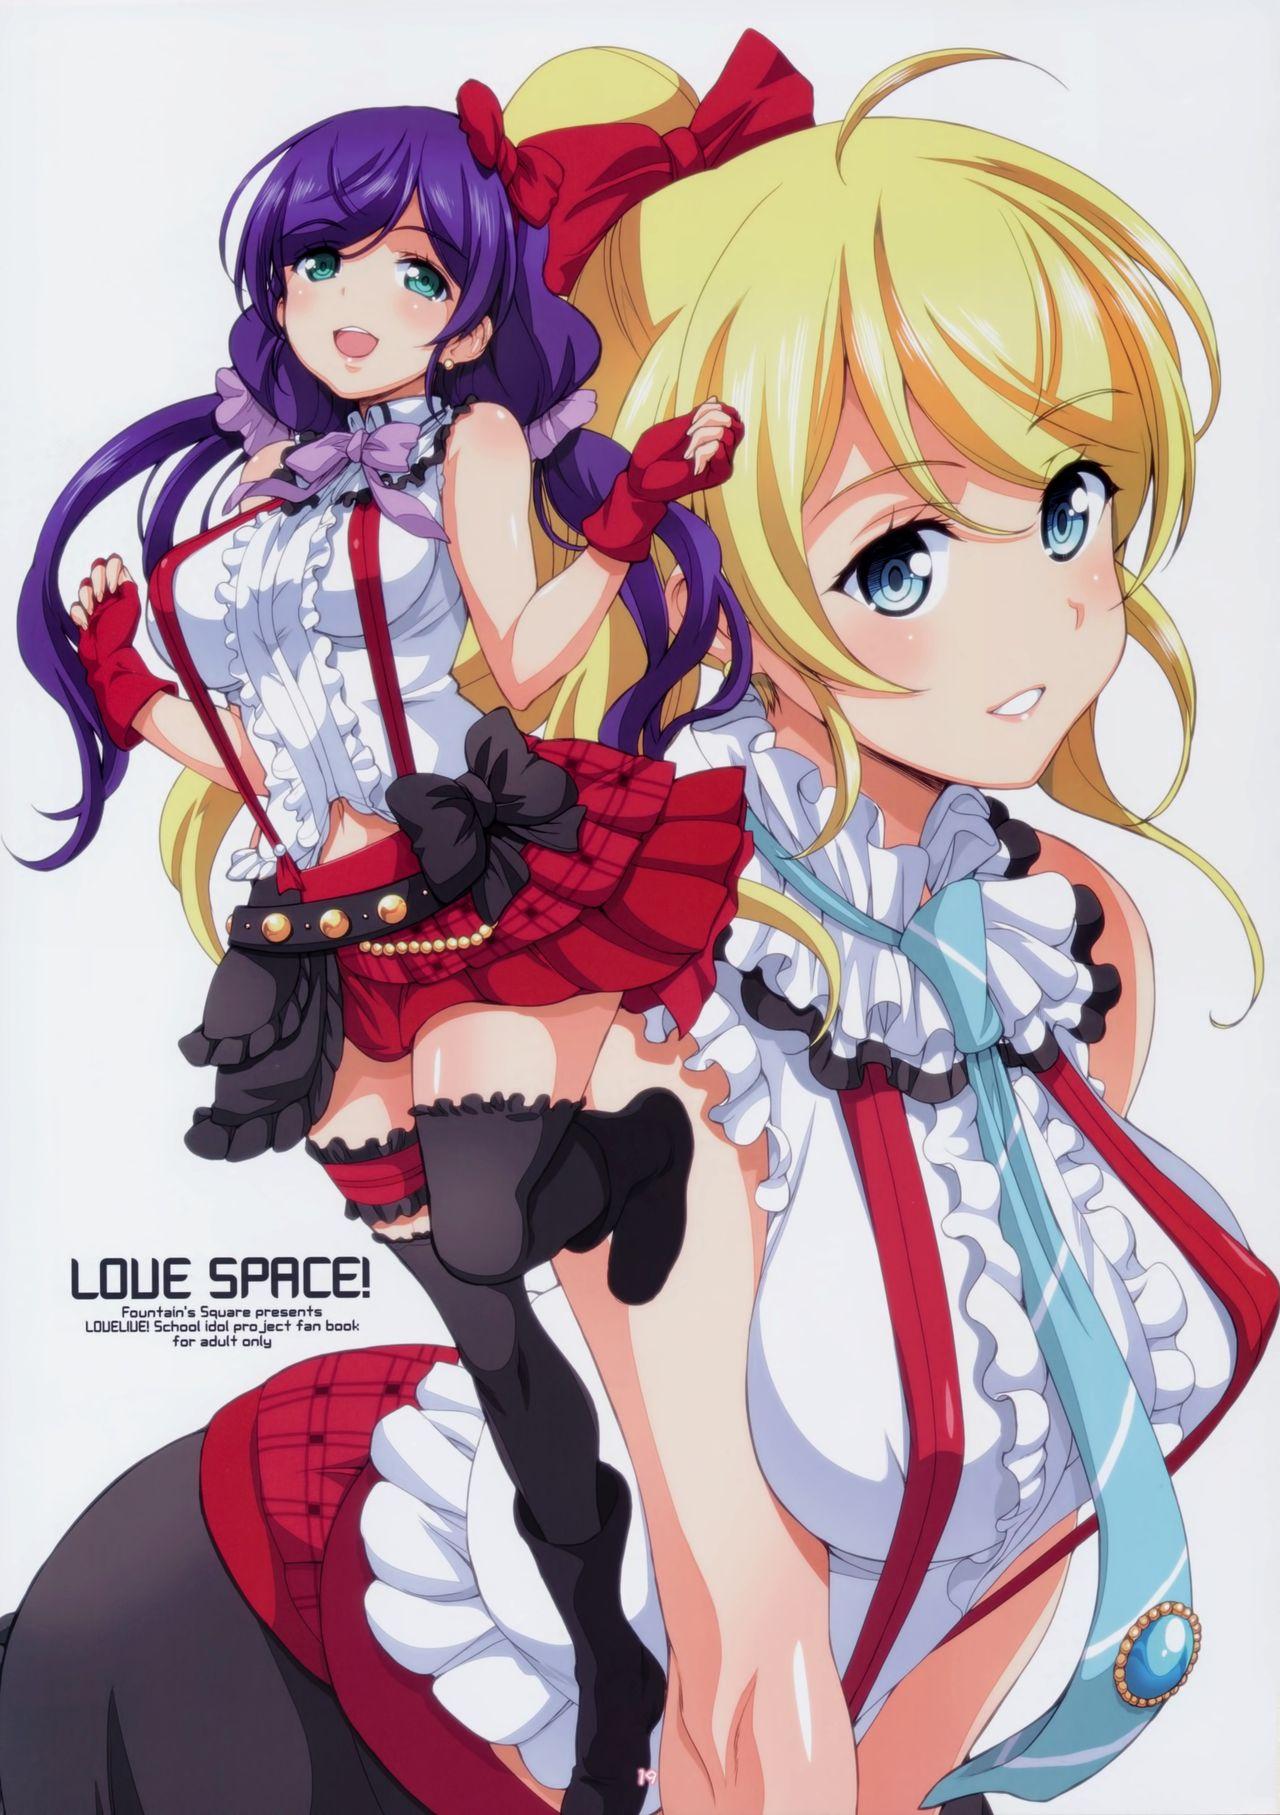 LOVE SPACE!+ 17